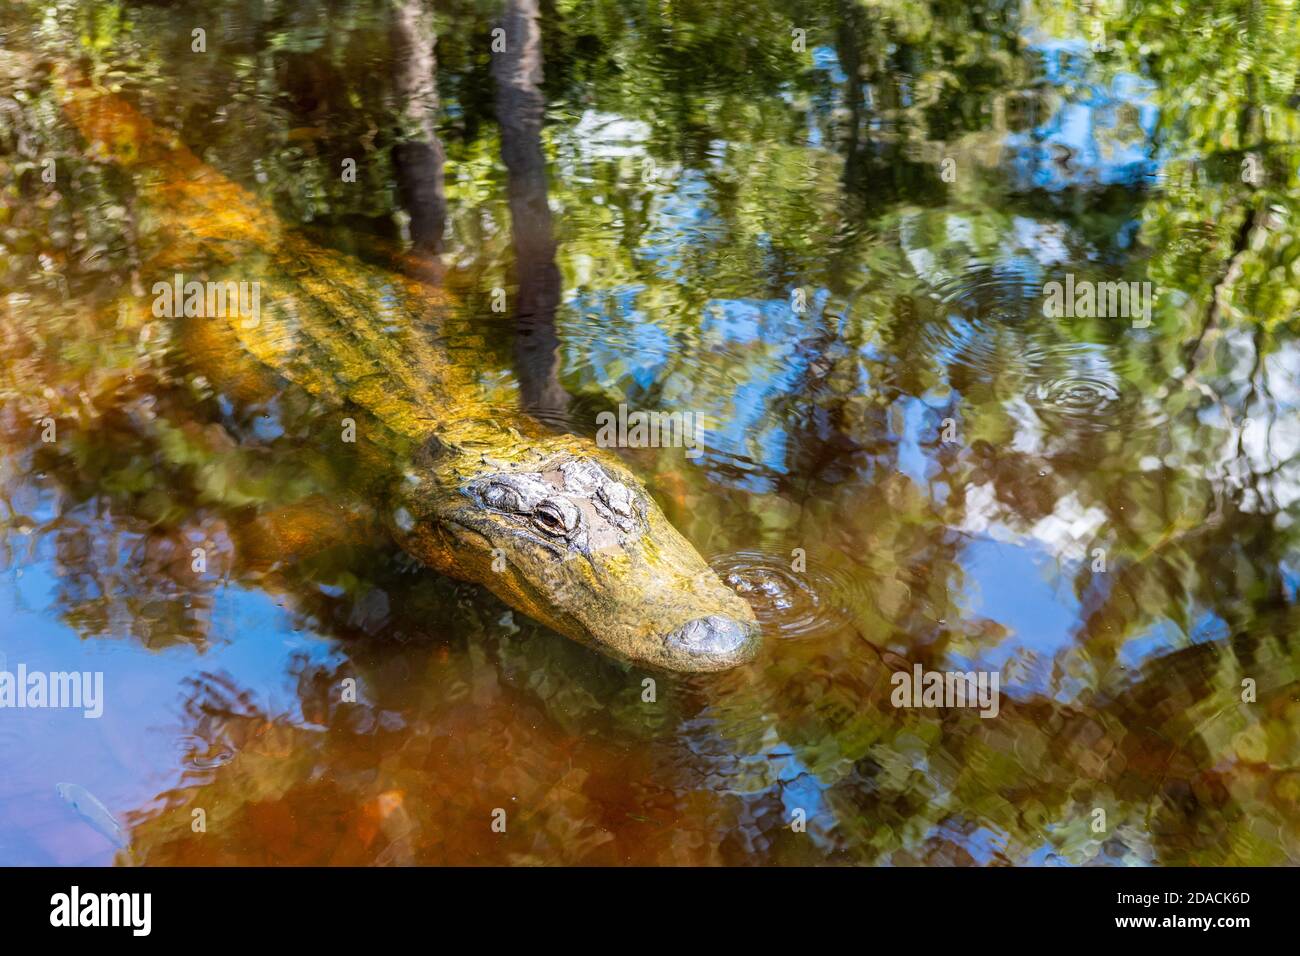 Alligator Mississippiensis barely submerged as the surrounding swamp reflects in the murky water of Davis Bayou, Mississippi Gulf Coast, USA. Stock Photo